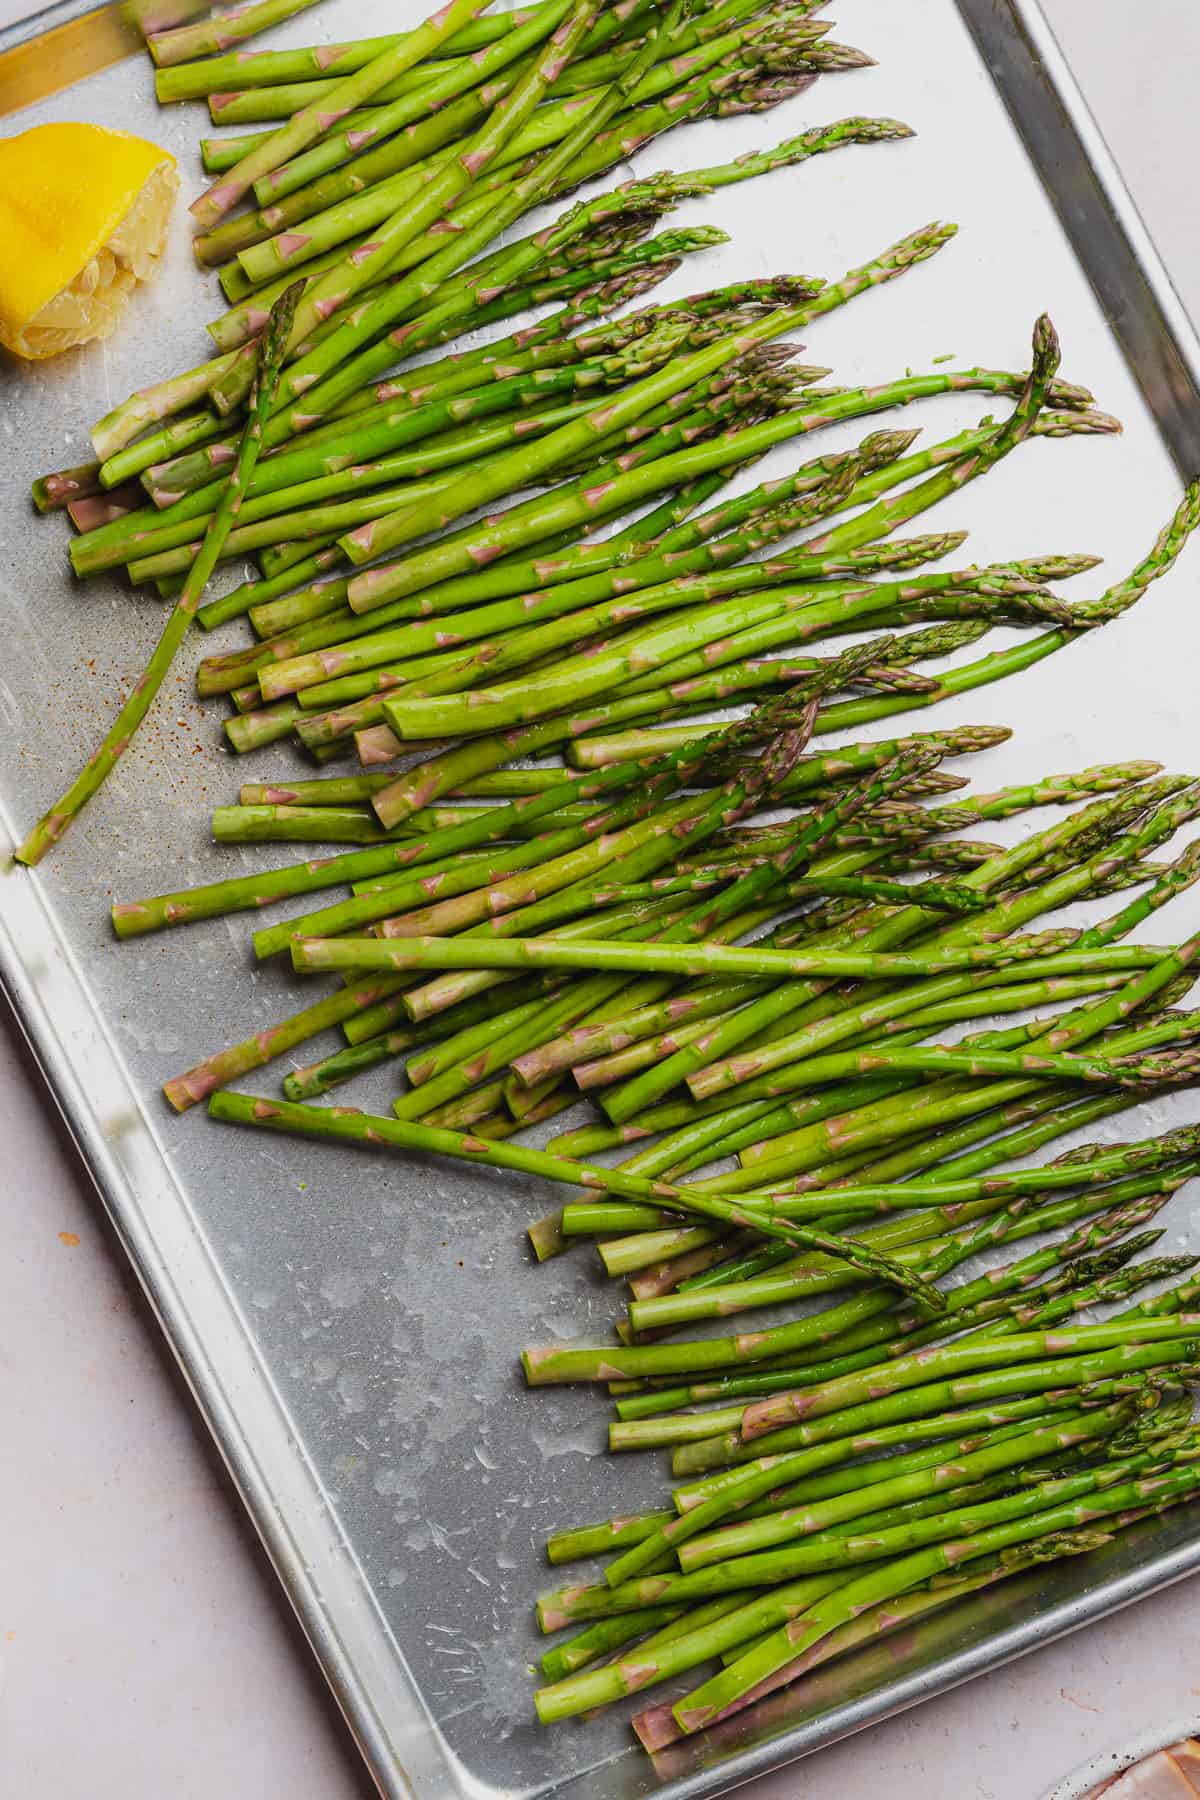 squeezing lemon juice over top of asparagus spears